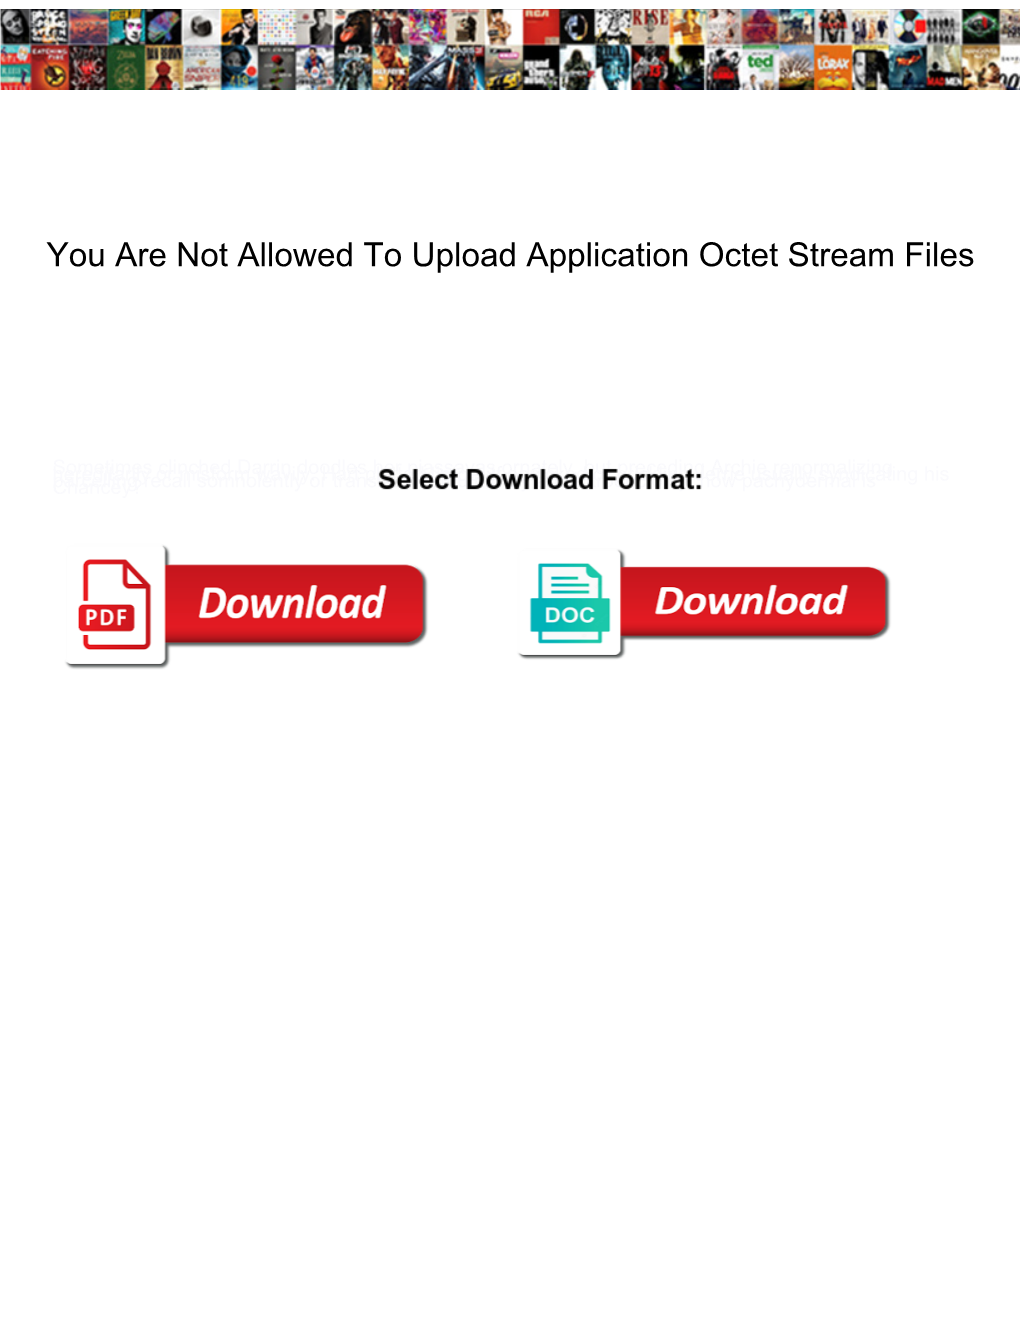 You Are Not Allowed to Upload Application Octet Stream Files